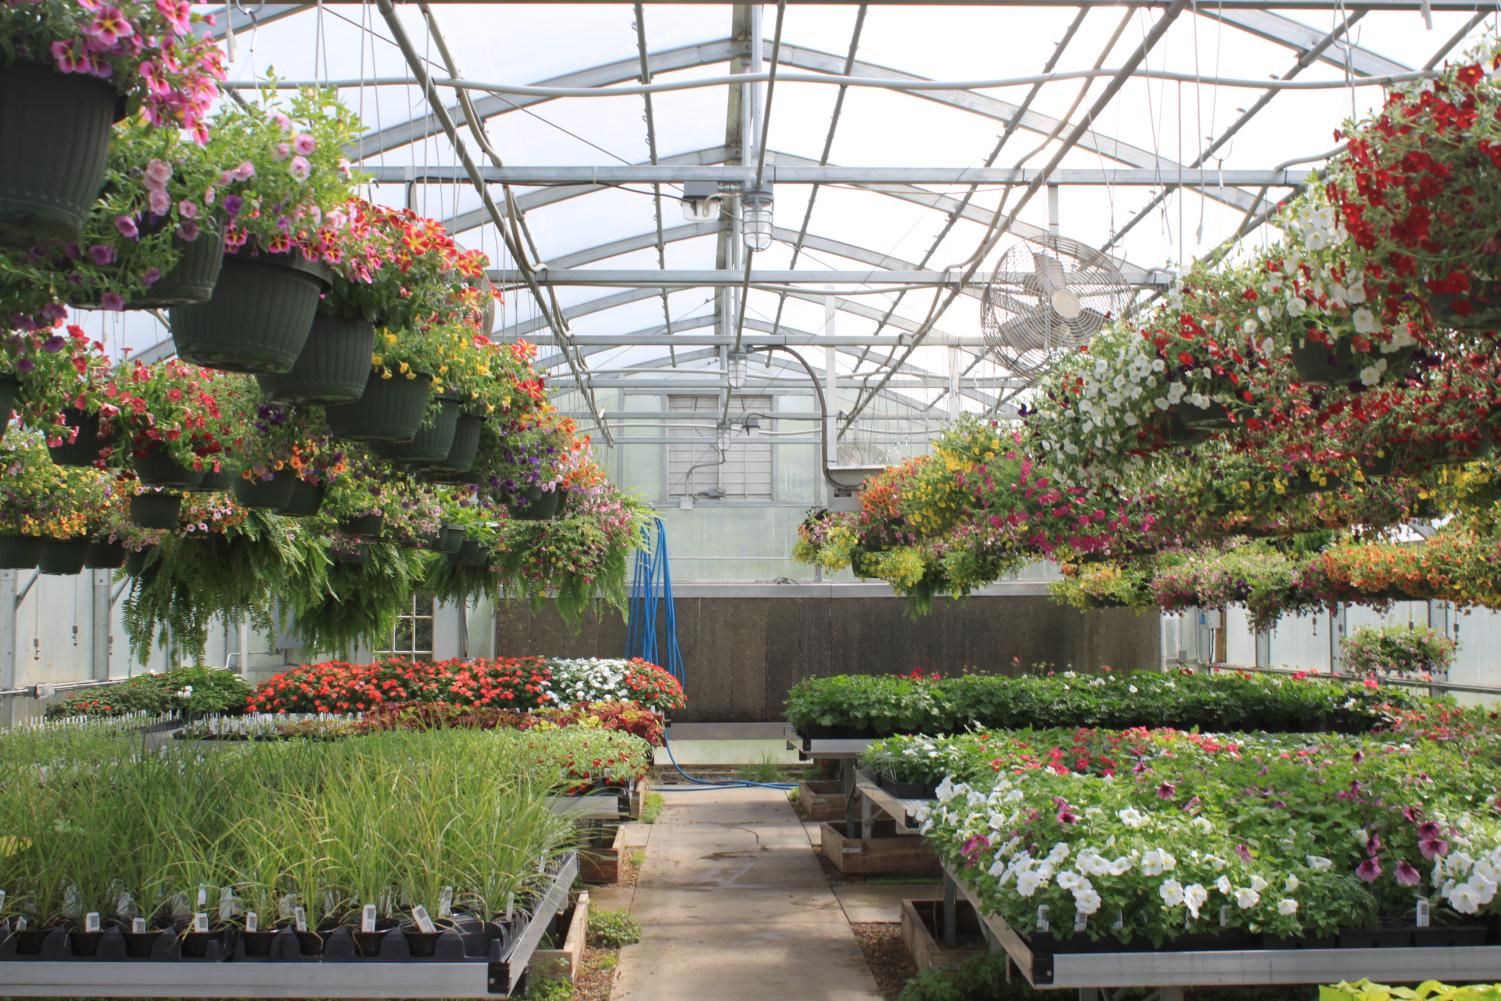 Spring+Has+Sprung+in+the+WCHS+Greenhouse%21